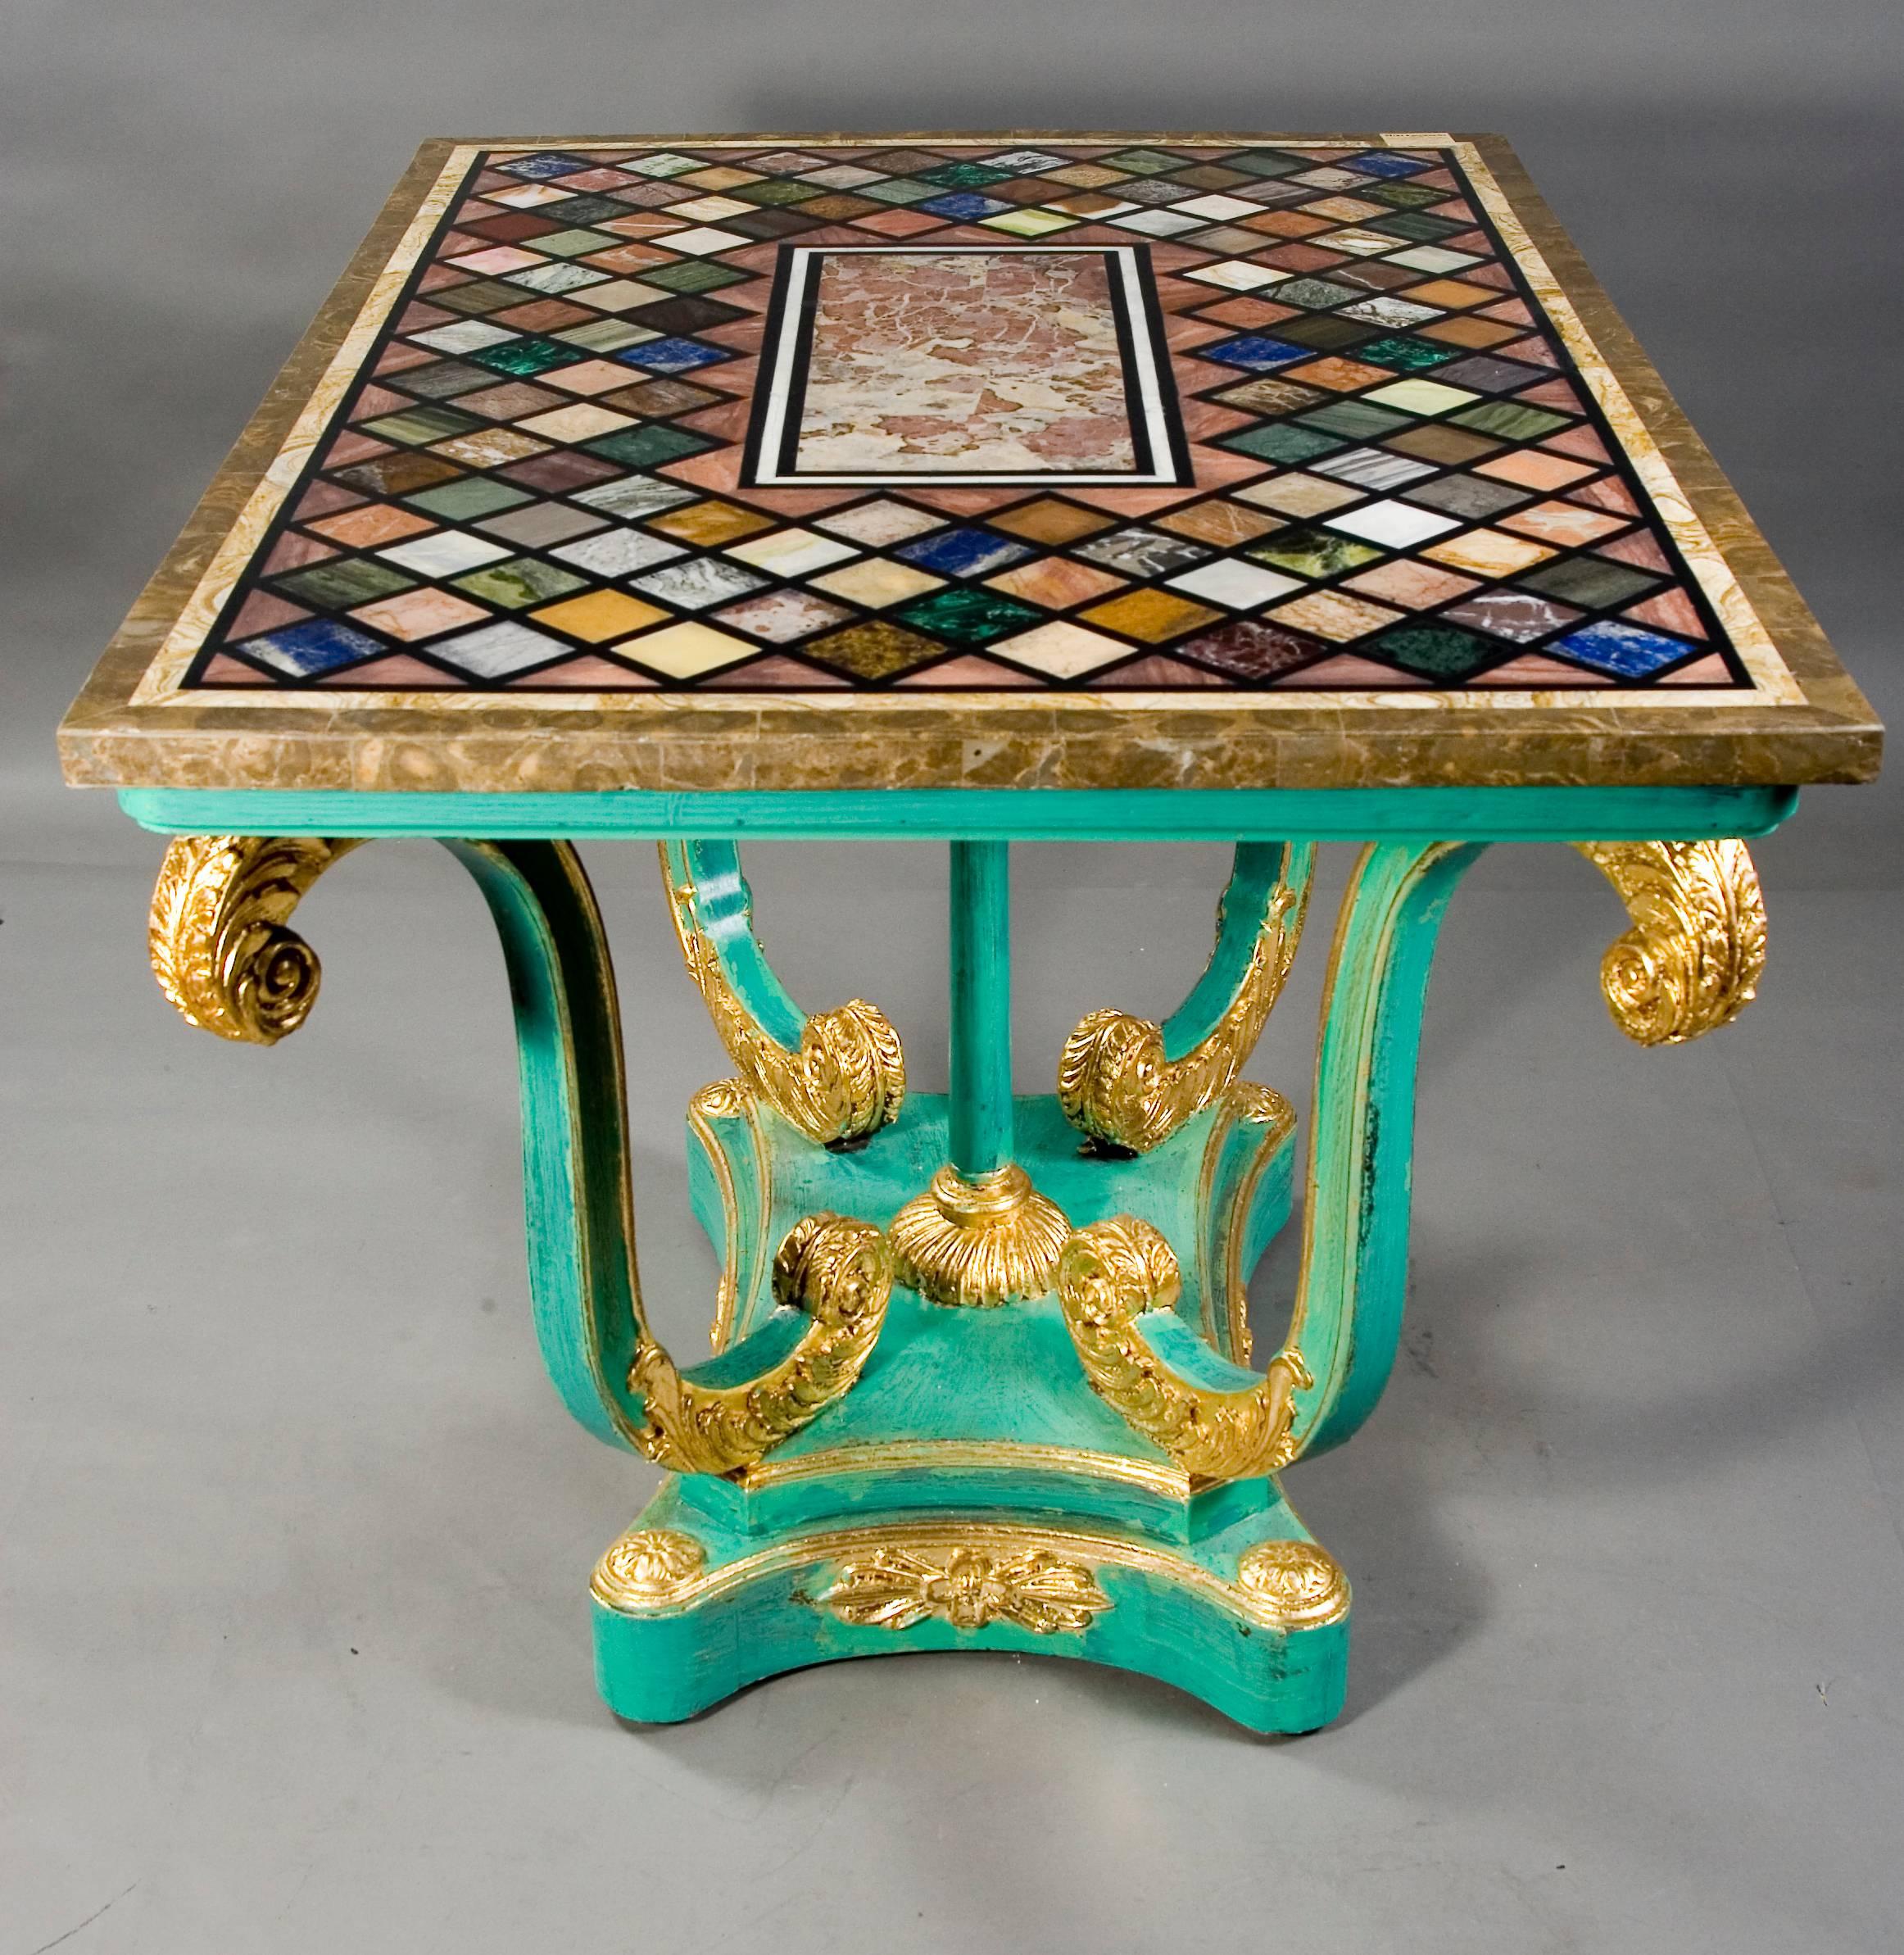 Inlay Pietra Dura Table in Neoclassical Style